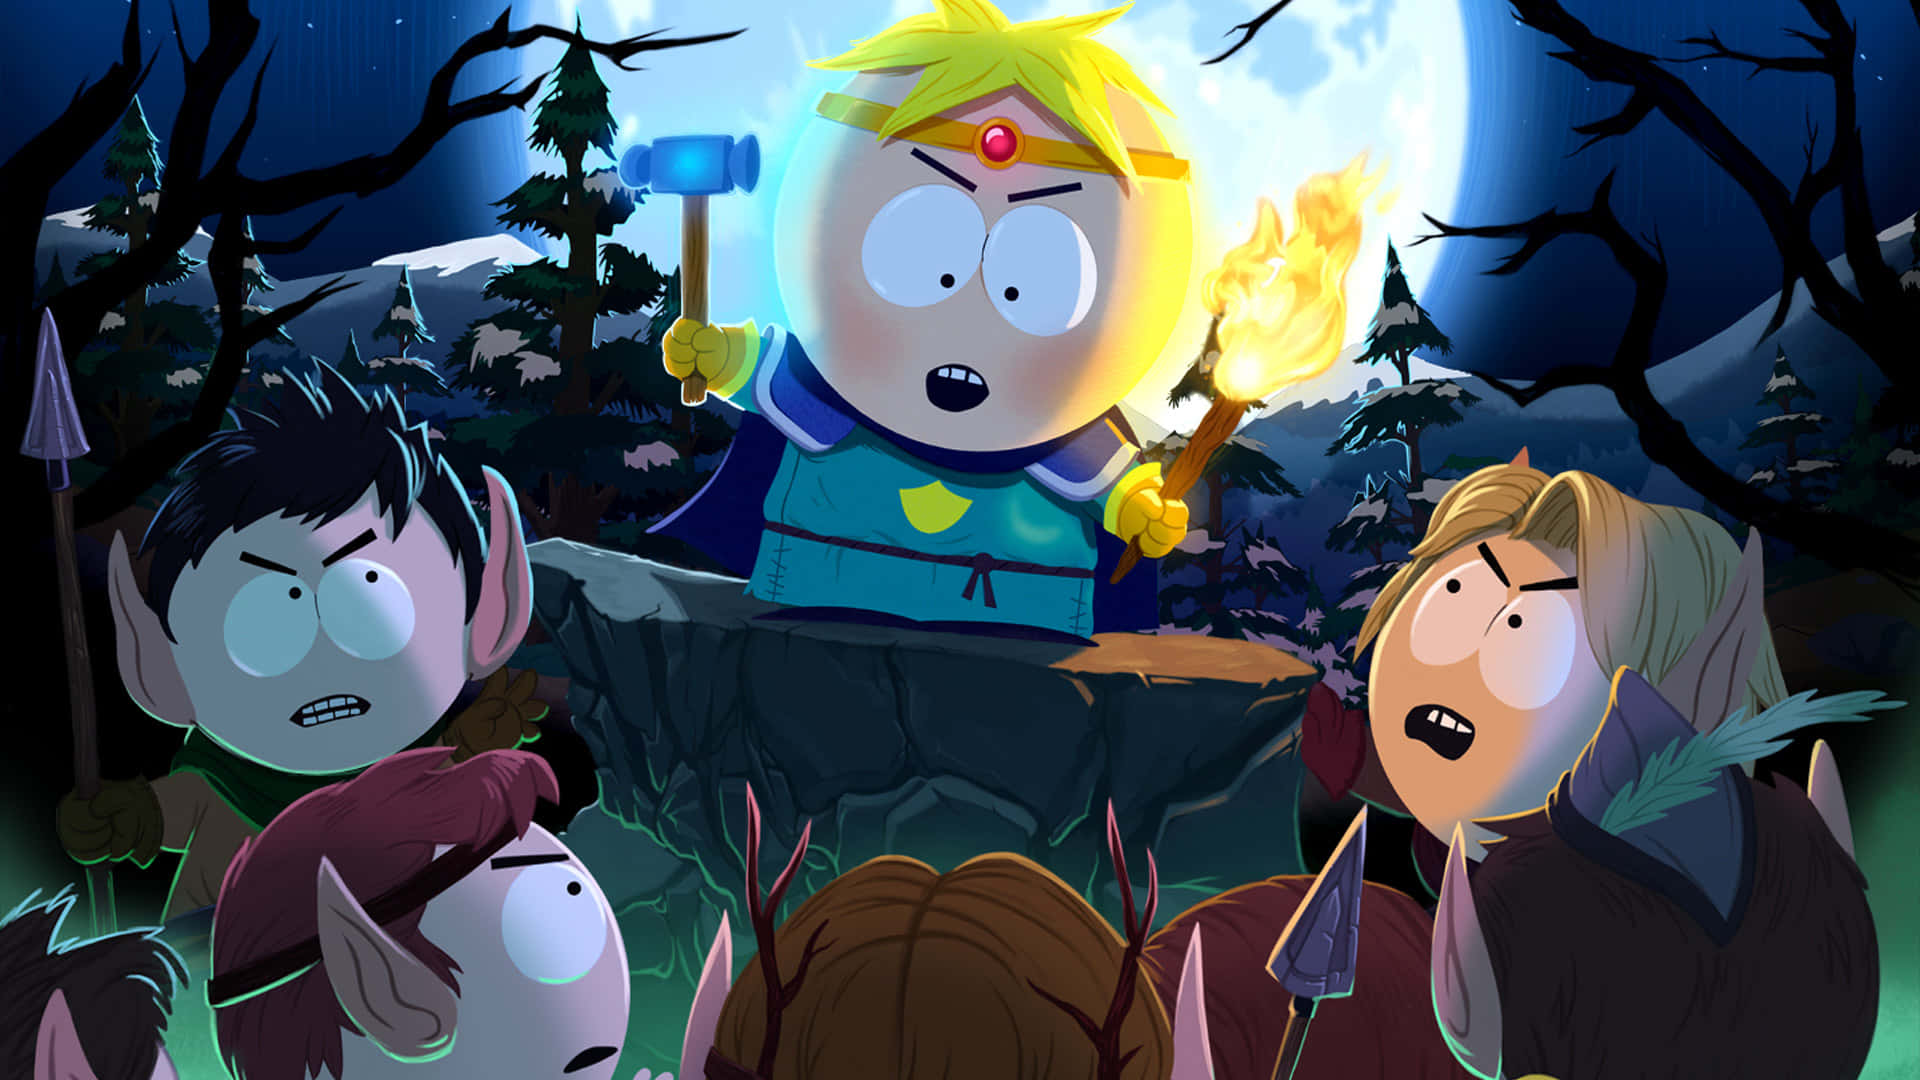 Animated Fantasy Adventure Butters Heroic Stance Wallpaper